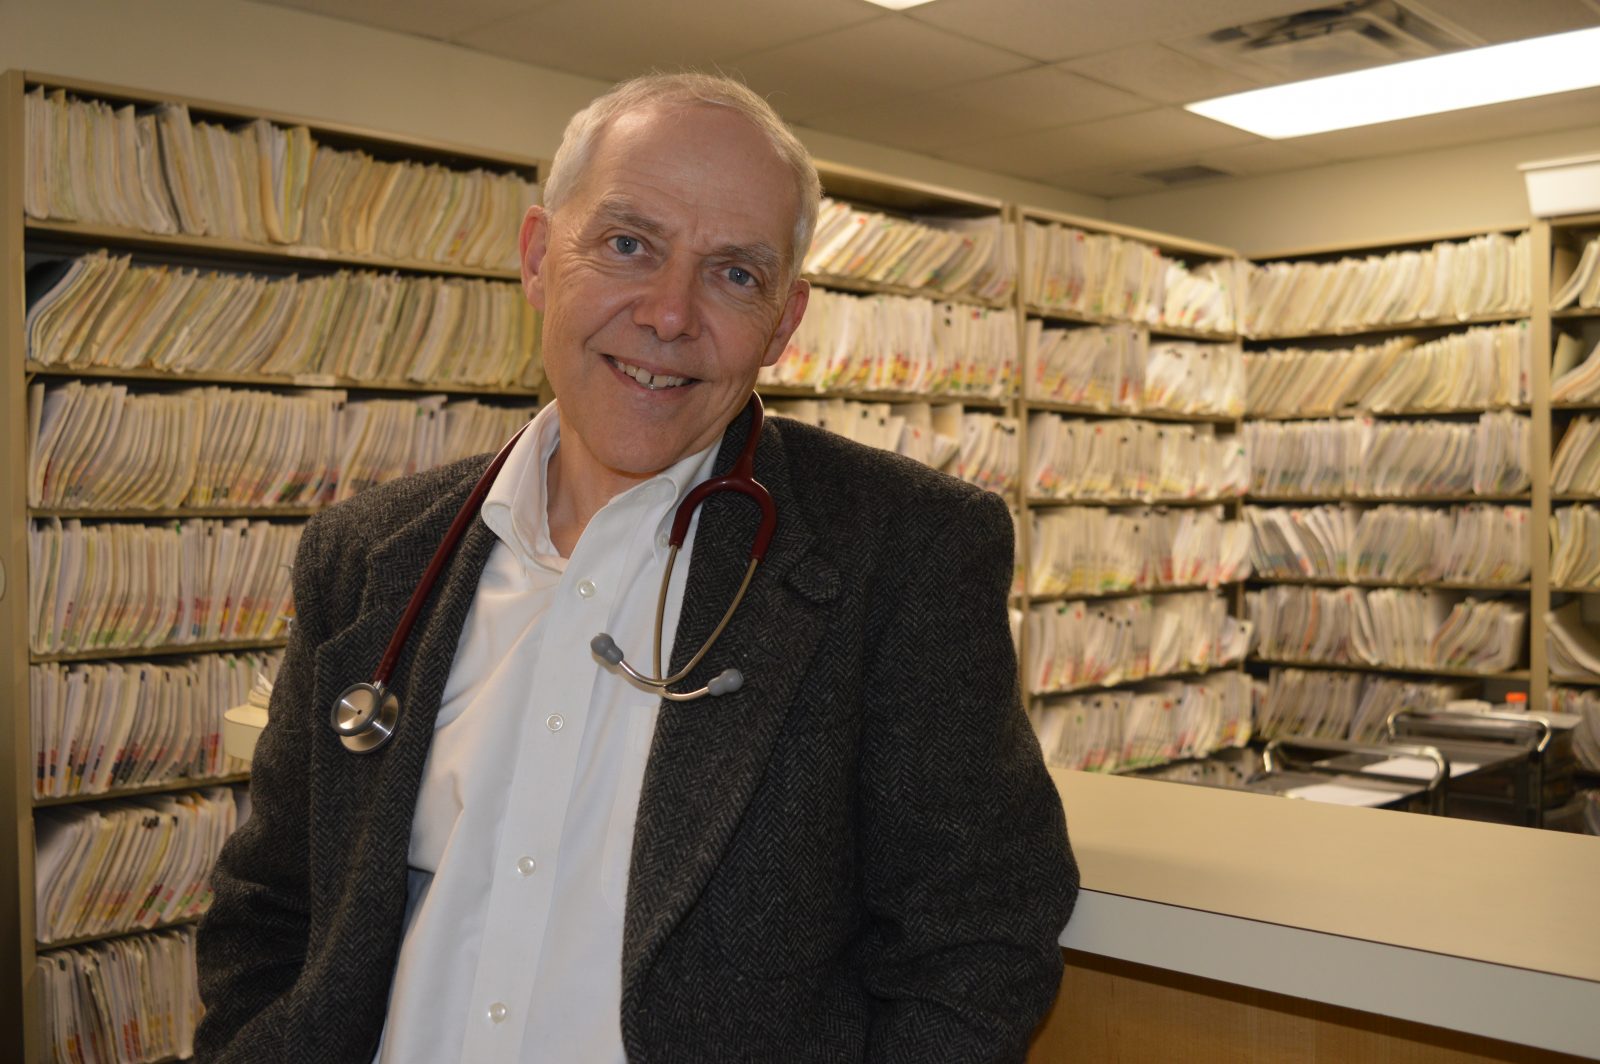 Local doctor believes cannabis should not be last resort for treatment